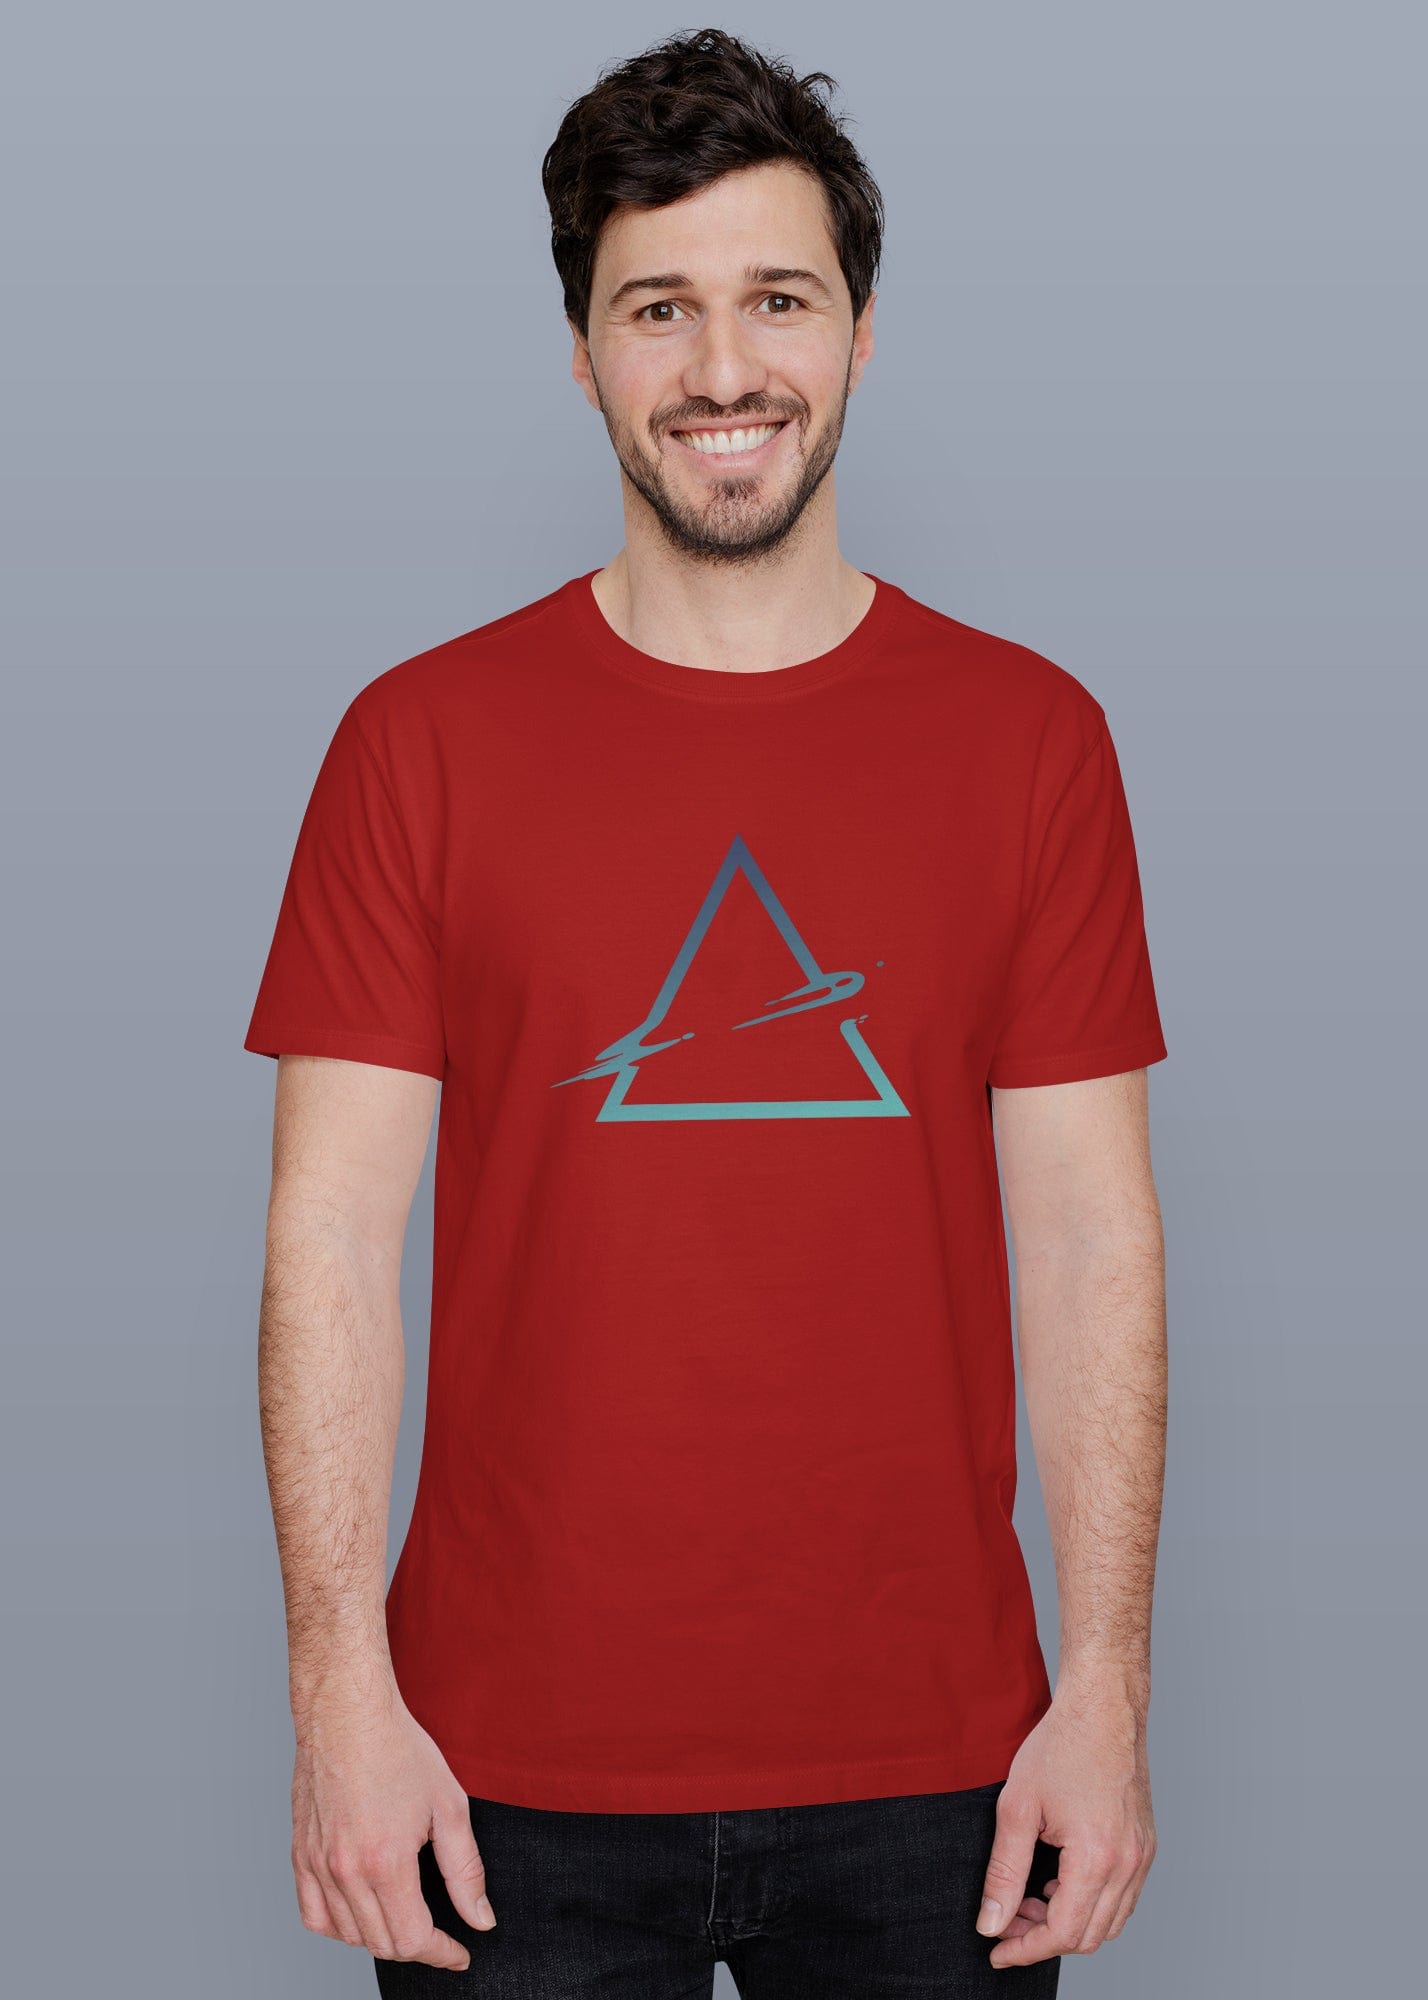 Abstract Triangle Printed Half Sleeve Premium Cotton T-shirt For Men